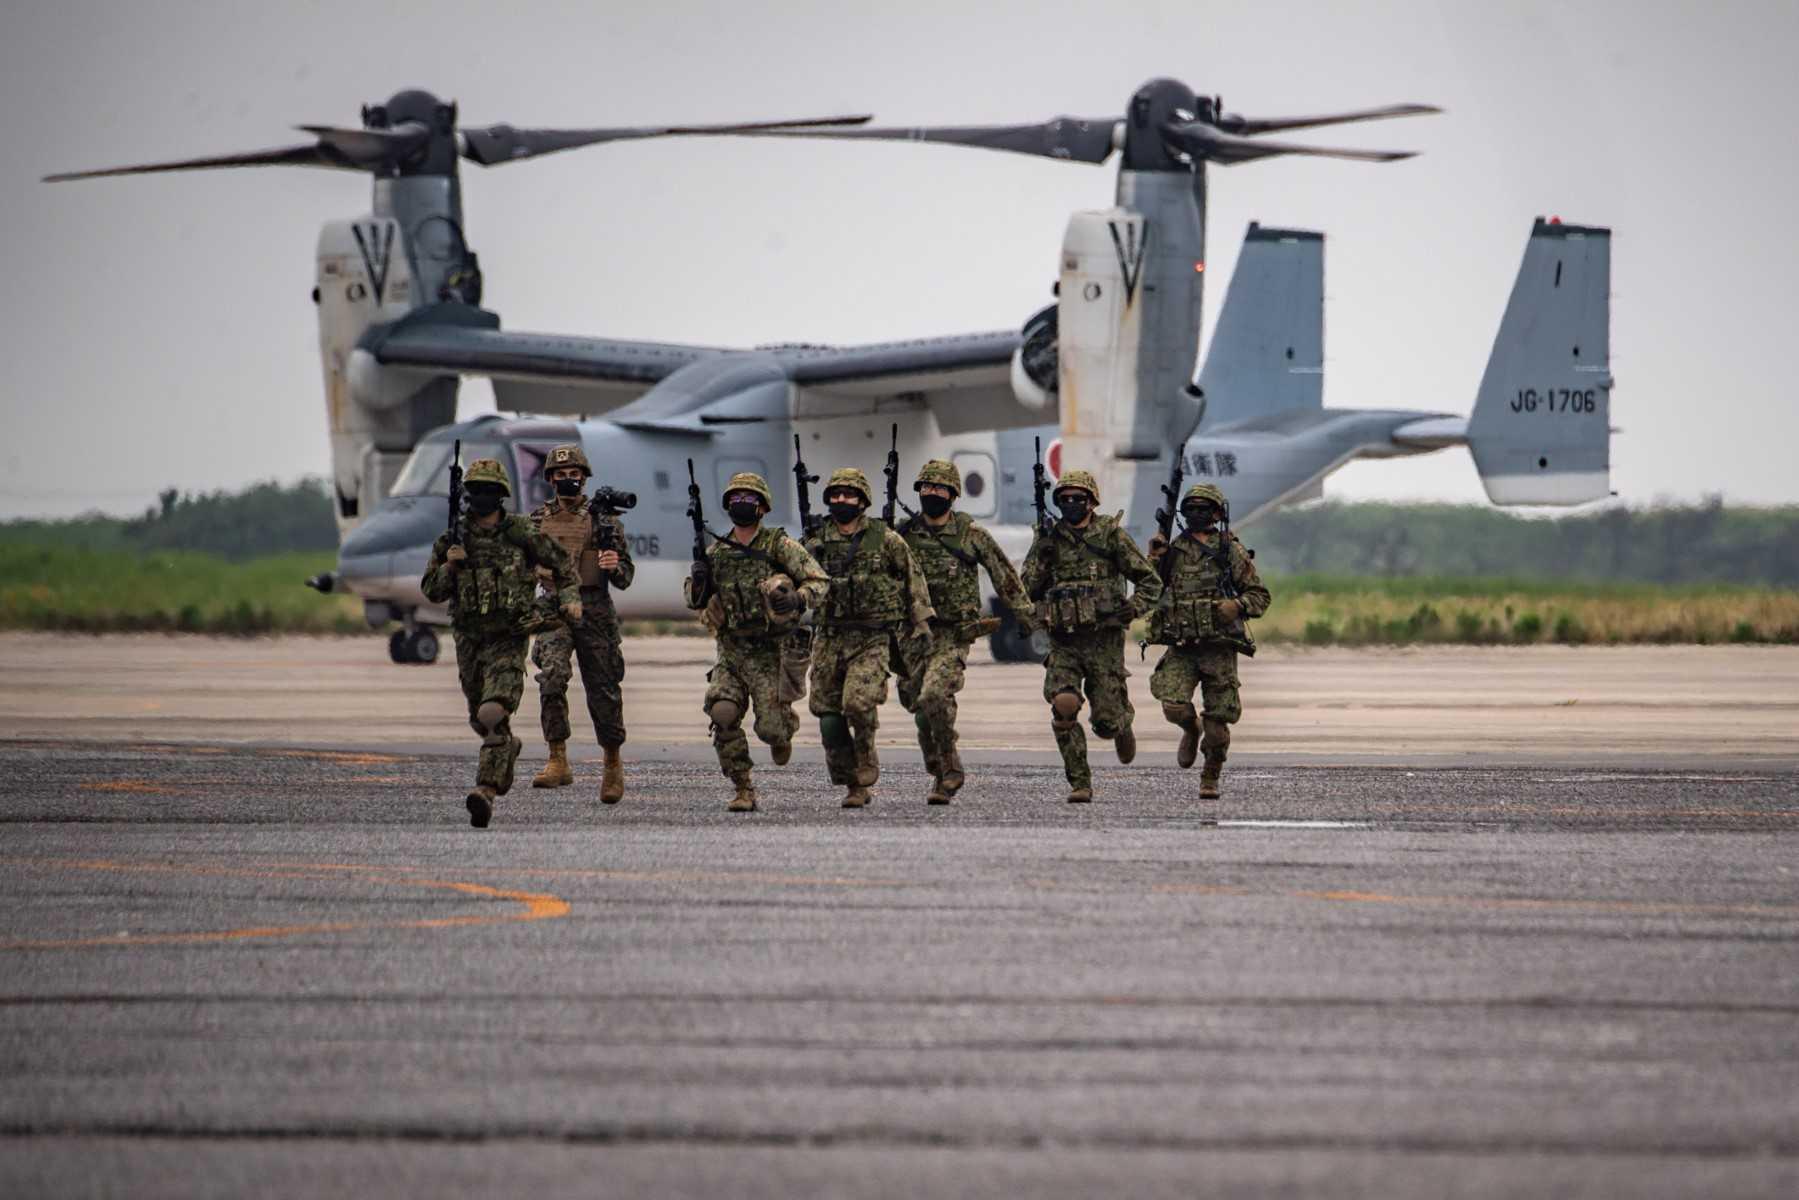 Members of the Japan Ground Self-Defense Force take part in a military display in front of a V-22 Osprey, for service members from 18 countries on the sidelines of the Pacific Amphibious Leaders Symposium 2022 (PALS 22), at the Japan Ground Self-Defense Force's Camp Kisarazu in Chiba prefecture on June 16. Photo: AFP 